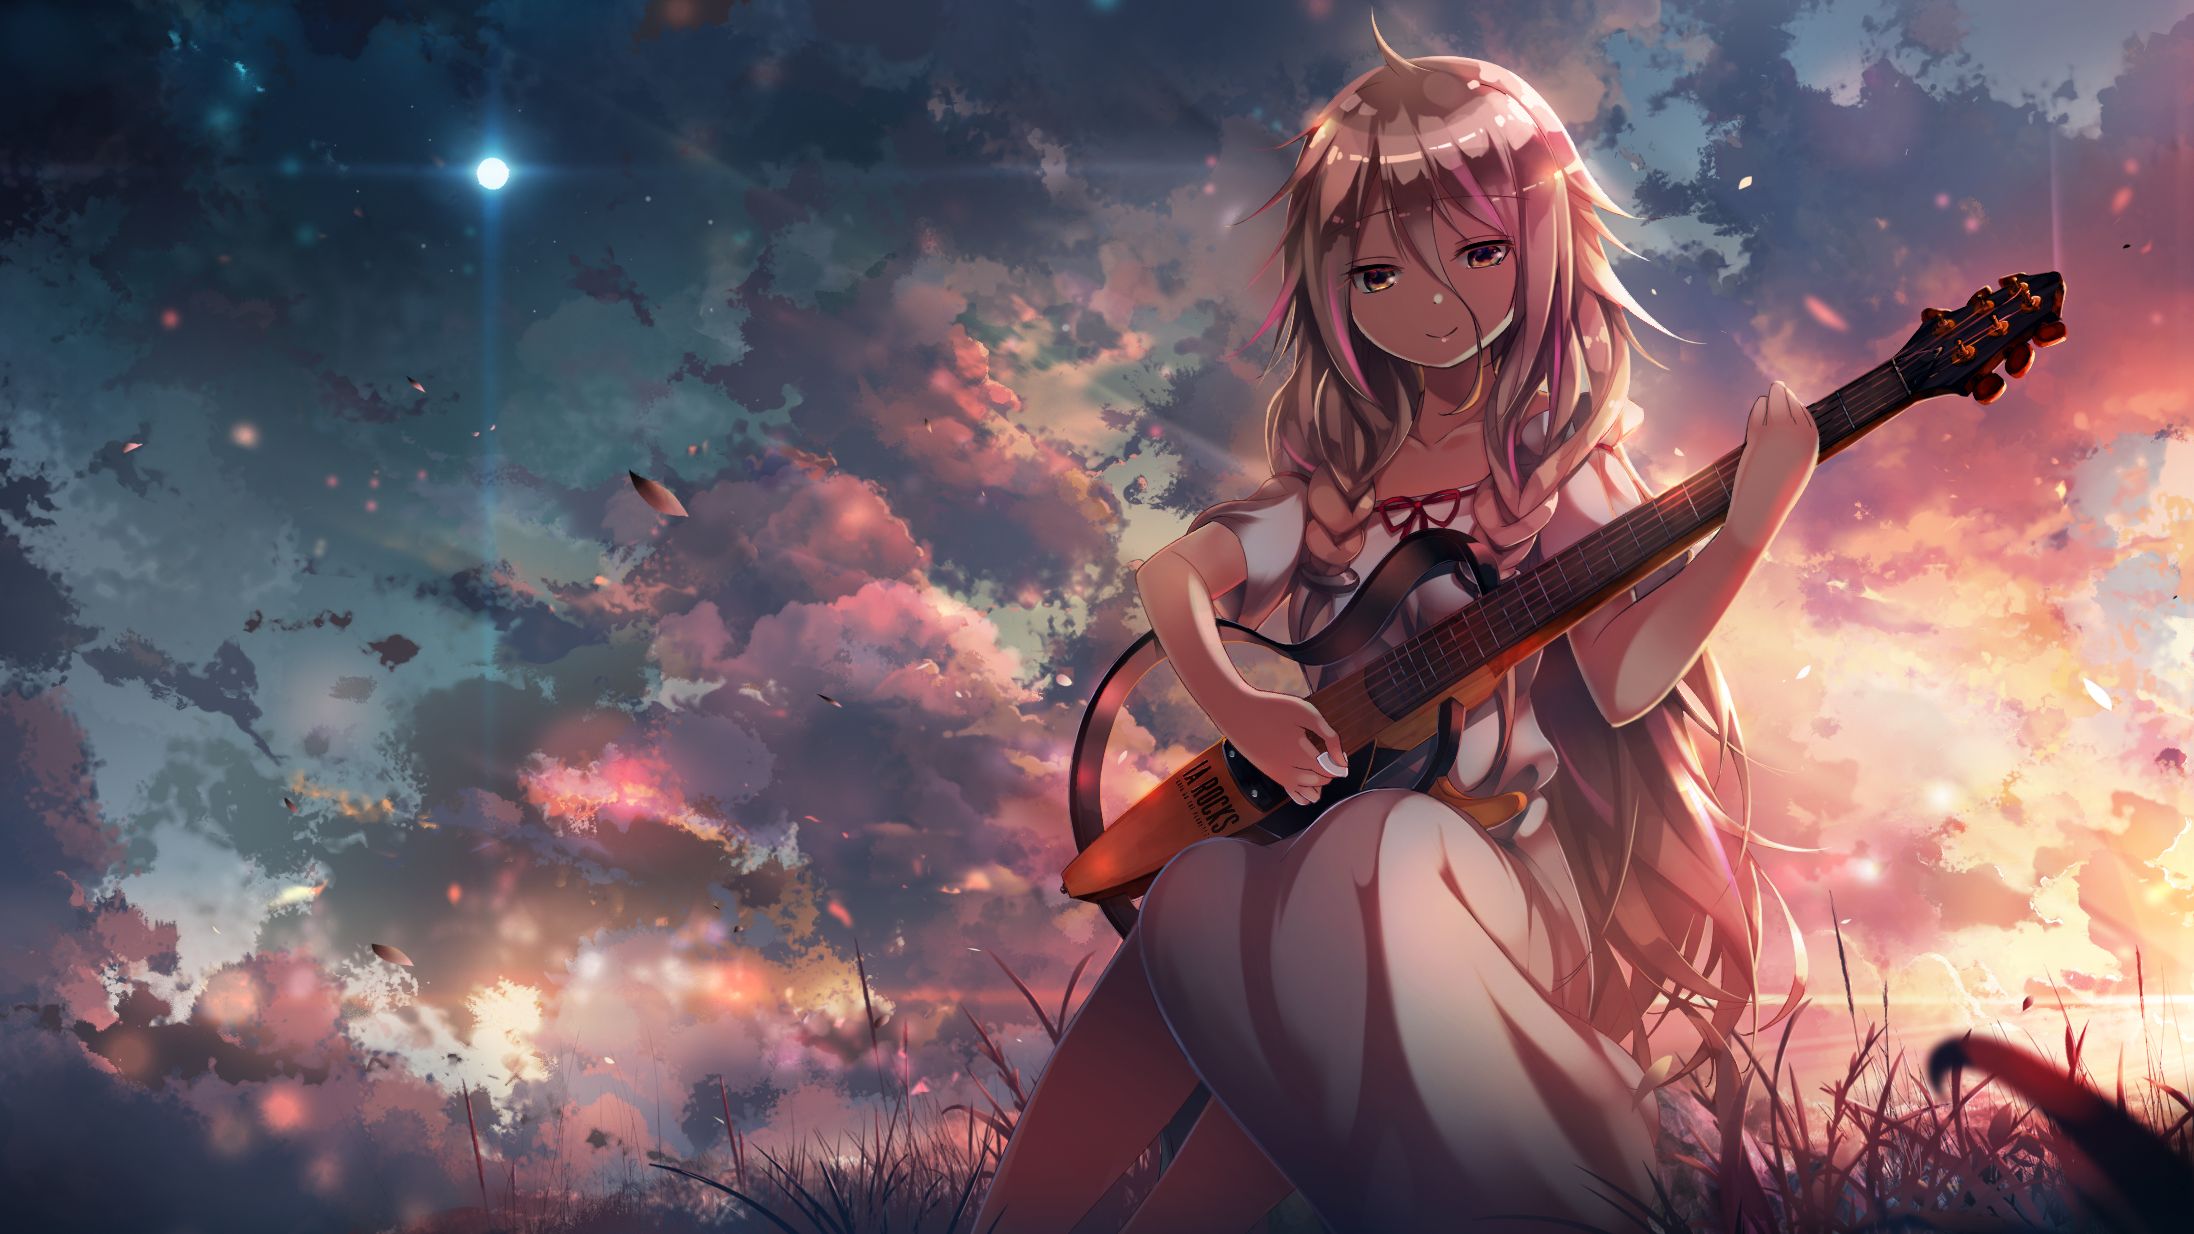 Download Ia Vocaloid wallpapers for mobile phone free Ia Vocaloid  HD pictures